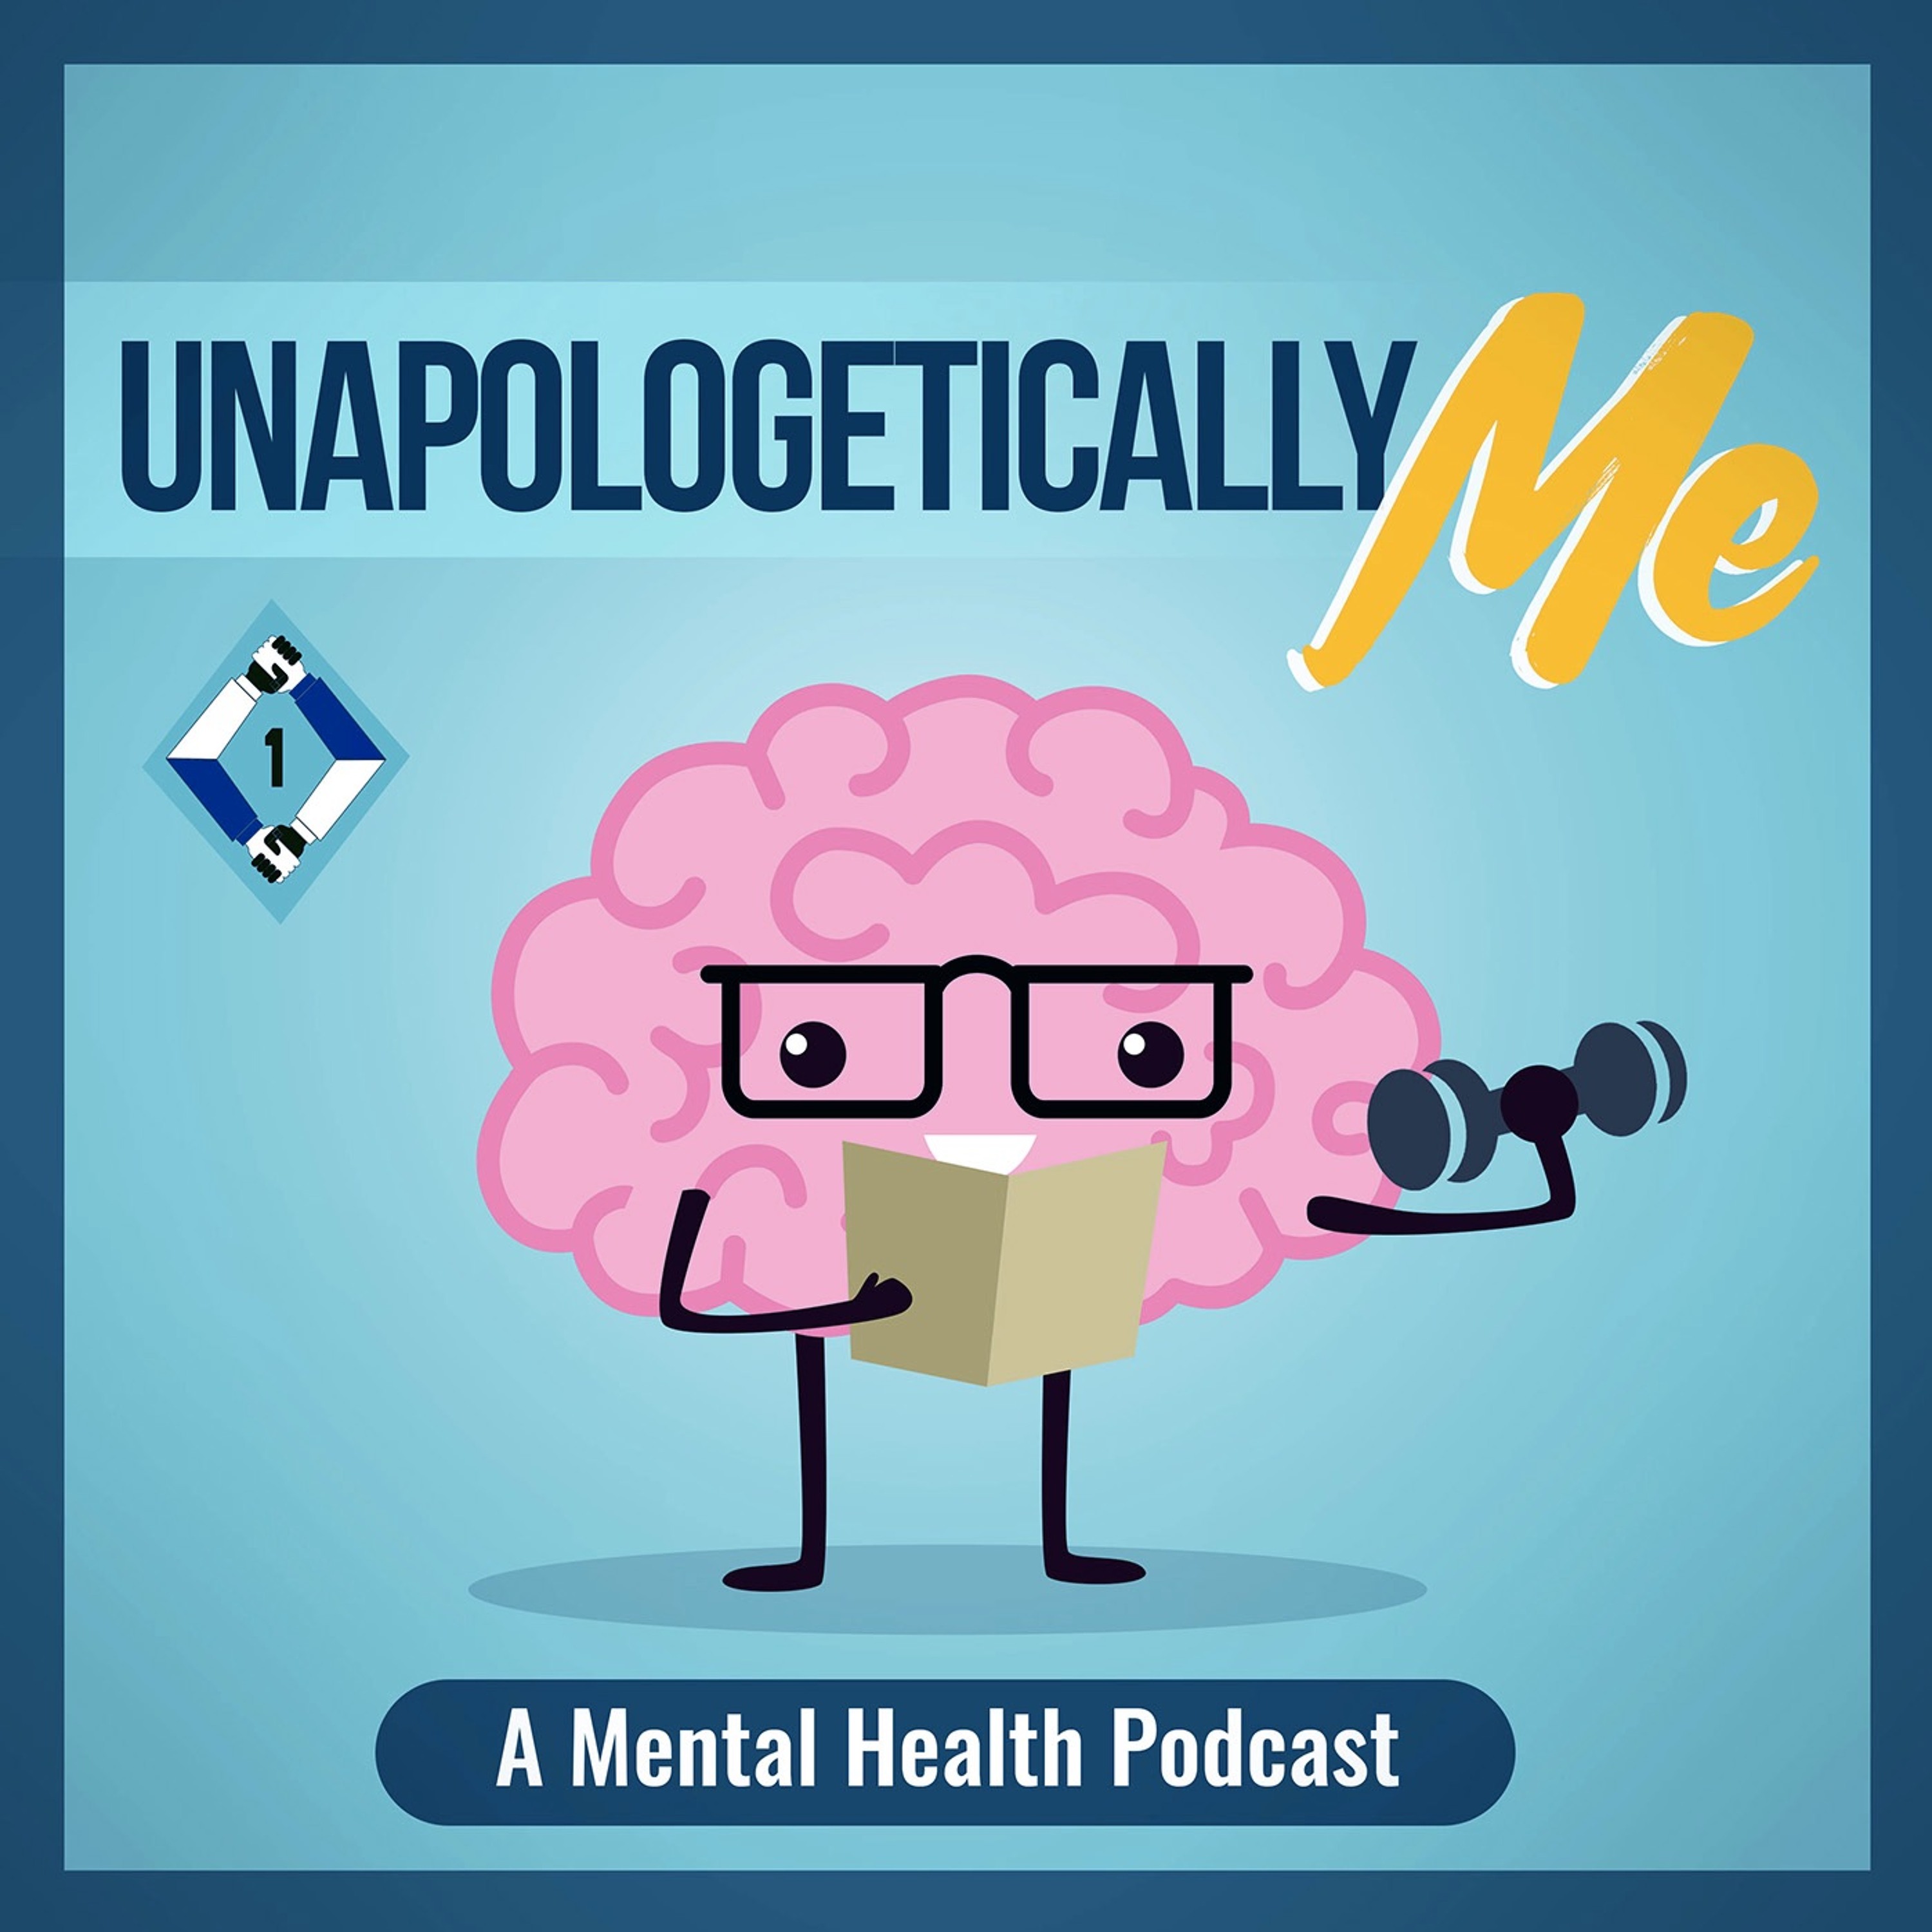 Unapologetically Me: A Mental Health Podcast - From Shots To Shakes